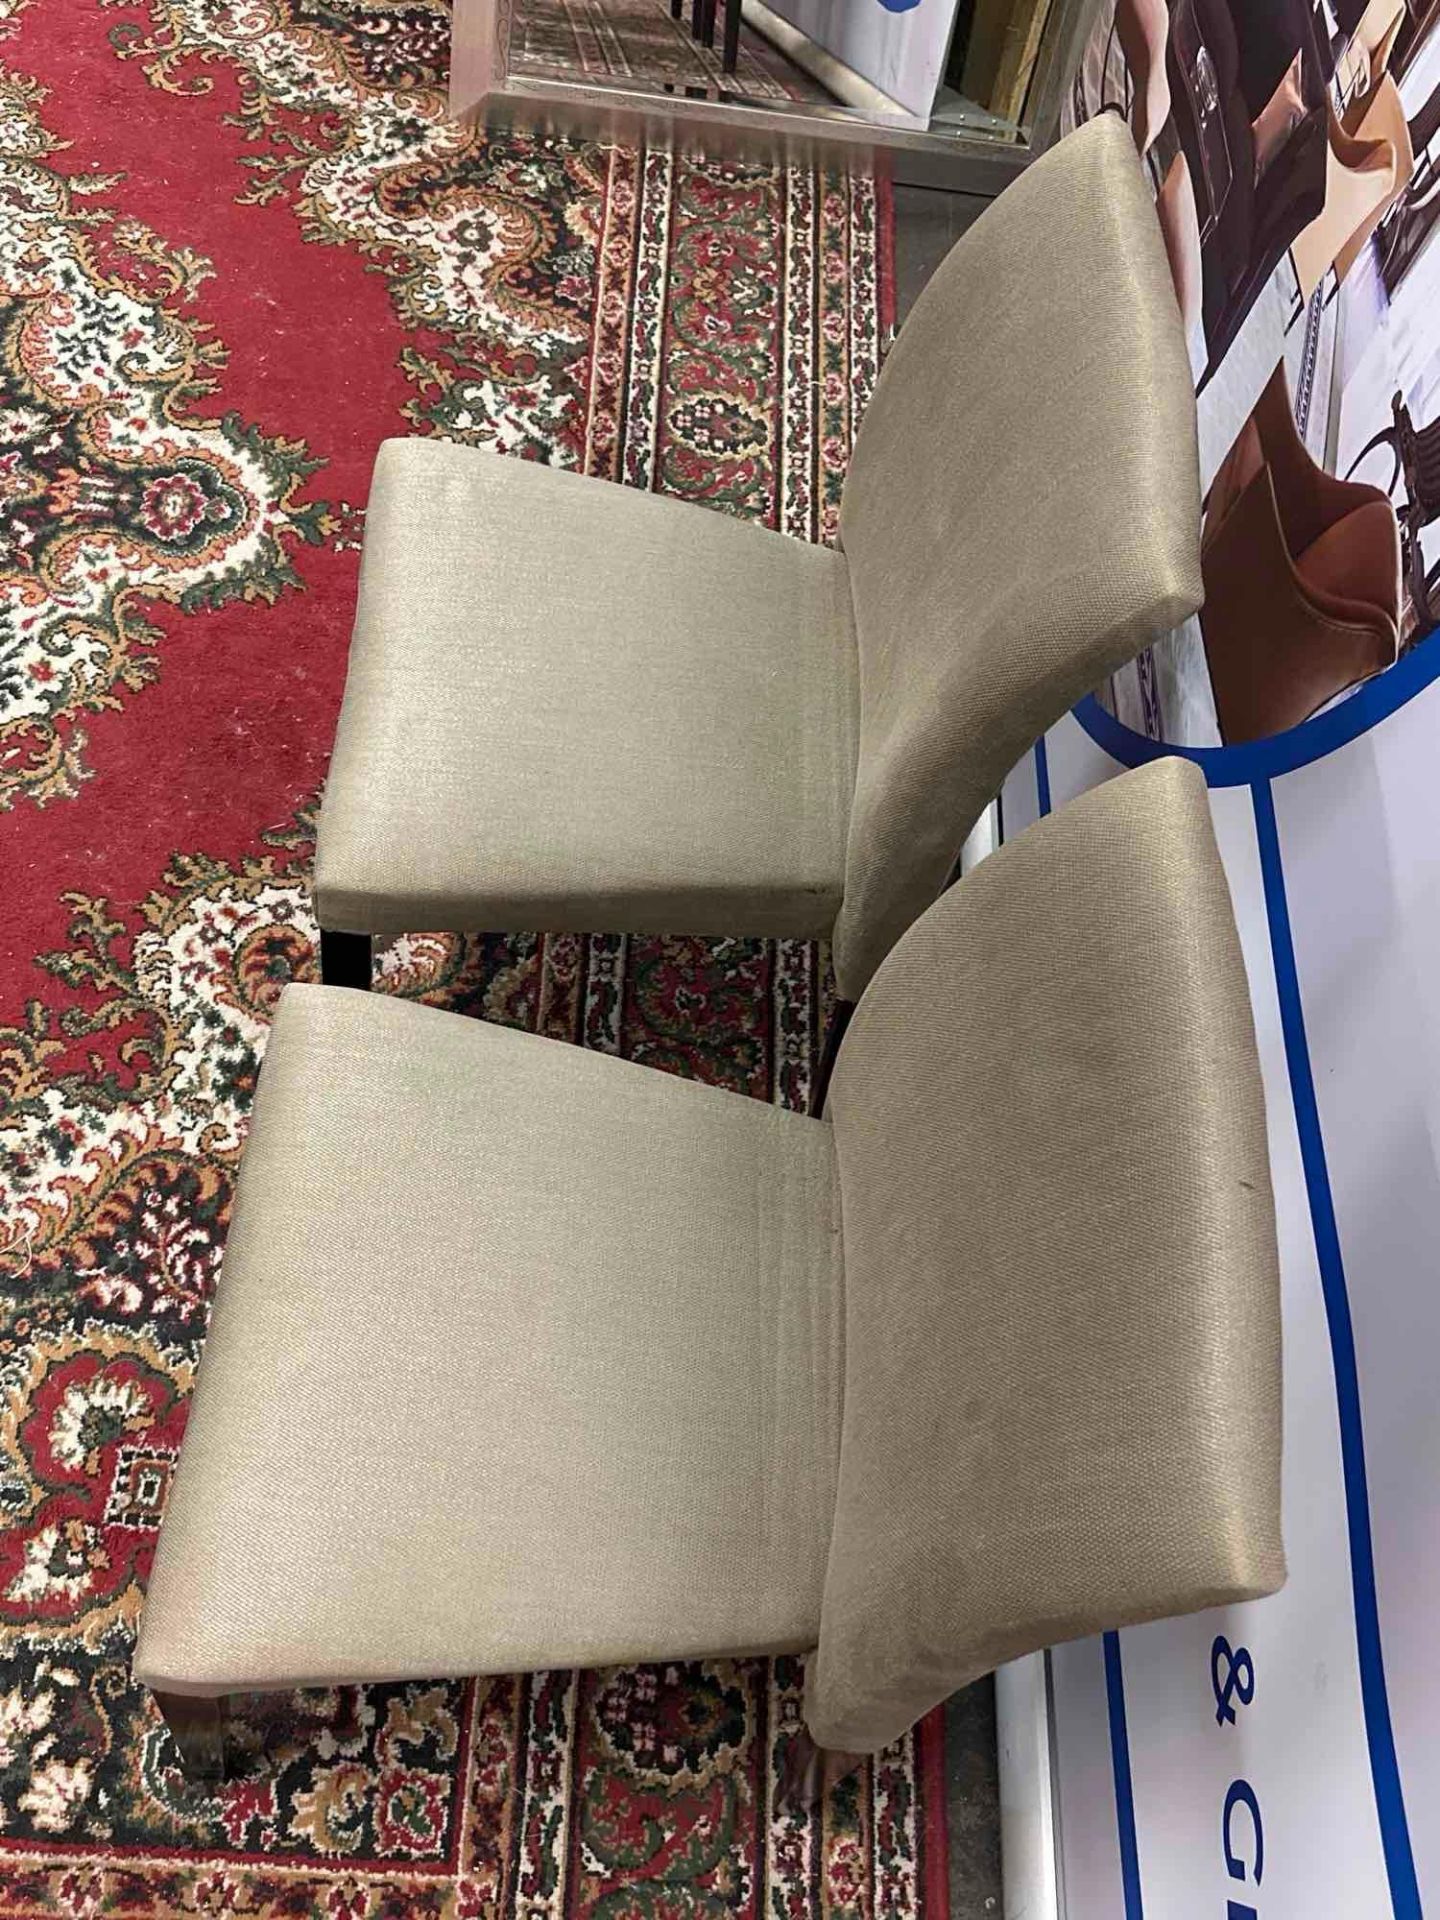 10 x Classic Style Upholstered Dining Chairs 48 x 48 x 86cm - Image 2 of 5